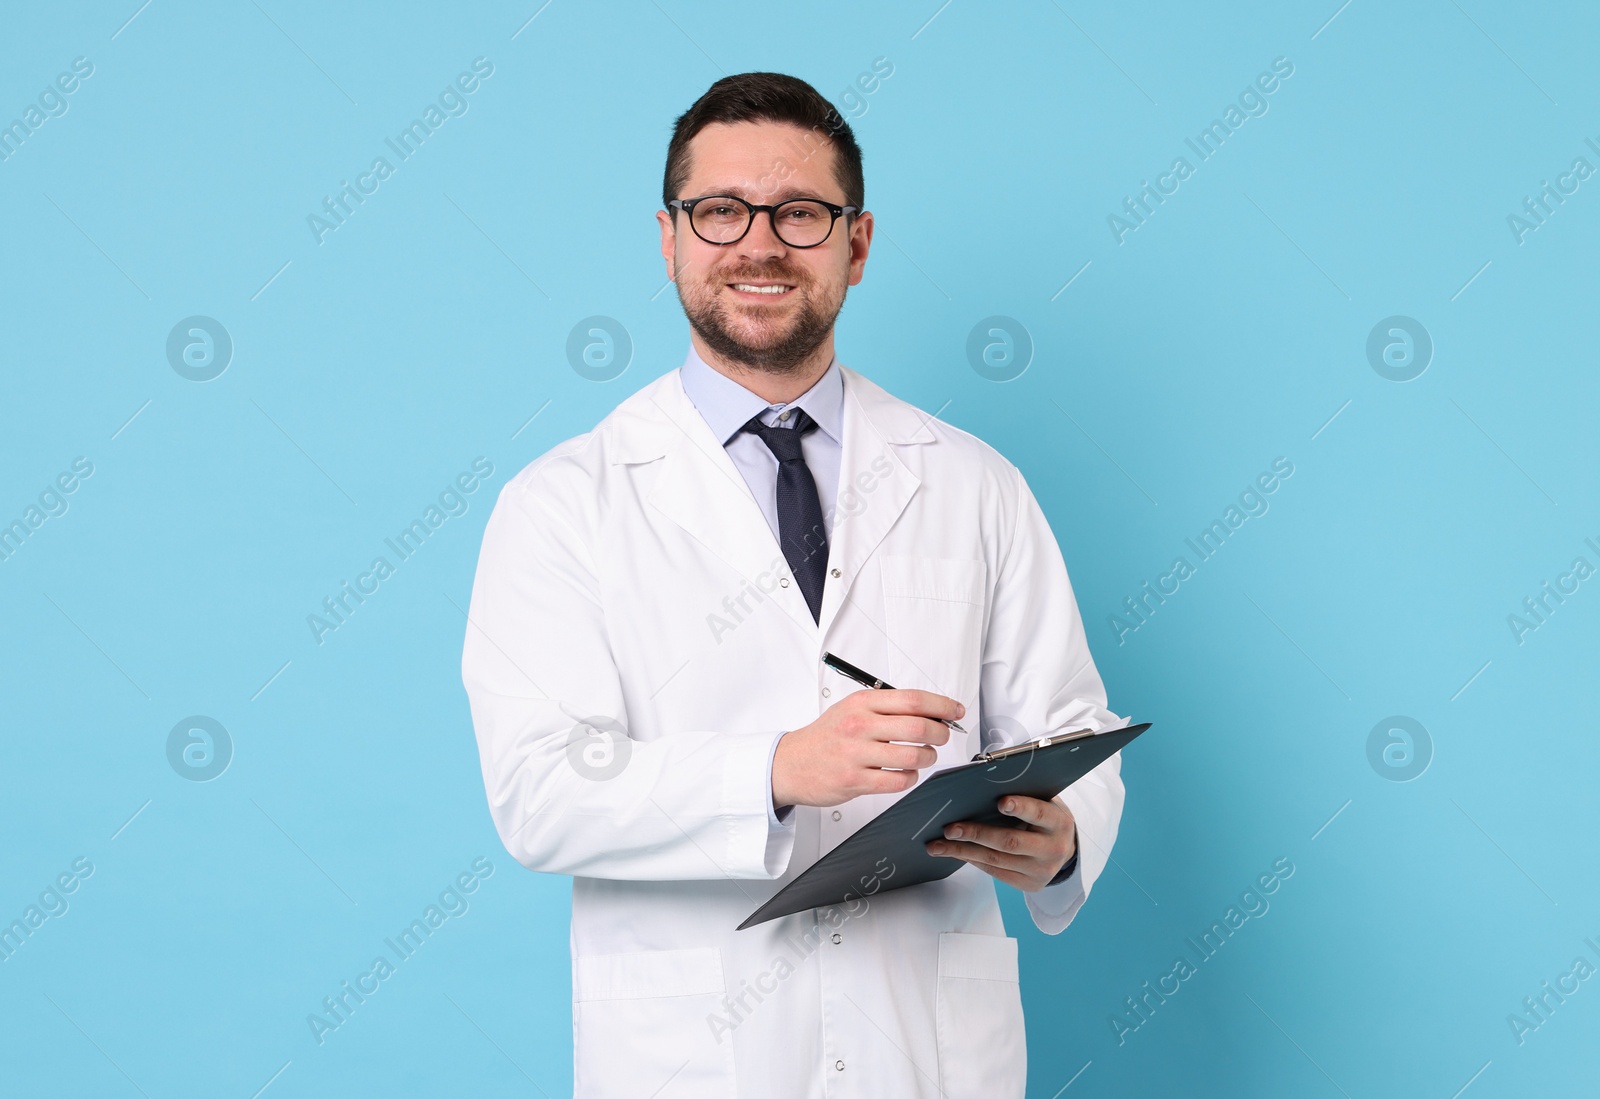 Photo of Smiling doctor with pen and clipboard on light blue background